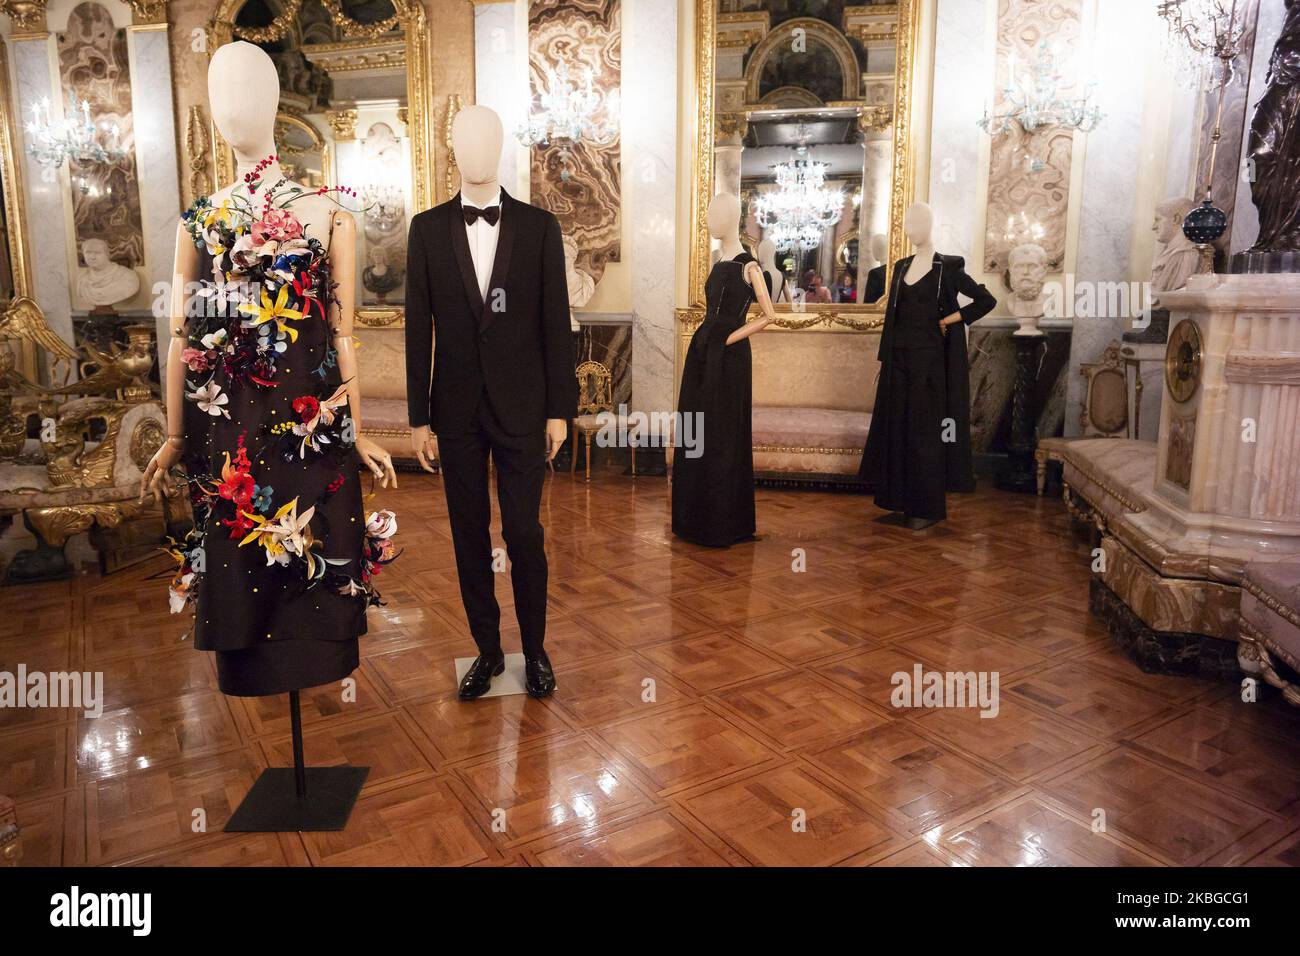 exhibition gala dinner in the palace (cena de gala en el palacio) within the Madrid fashion week, they will meet to recreate a gala dinner in the rooms of the Museum with designs by Roberto Verino, Juan Duyos and Hannibal Laguna in the Cerralbo museum in Madrid. February 6, 2020 Spain (Photo by Oscar Gonzalez/NurPhoto) Stock Photo